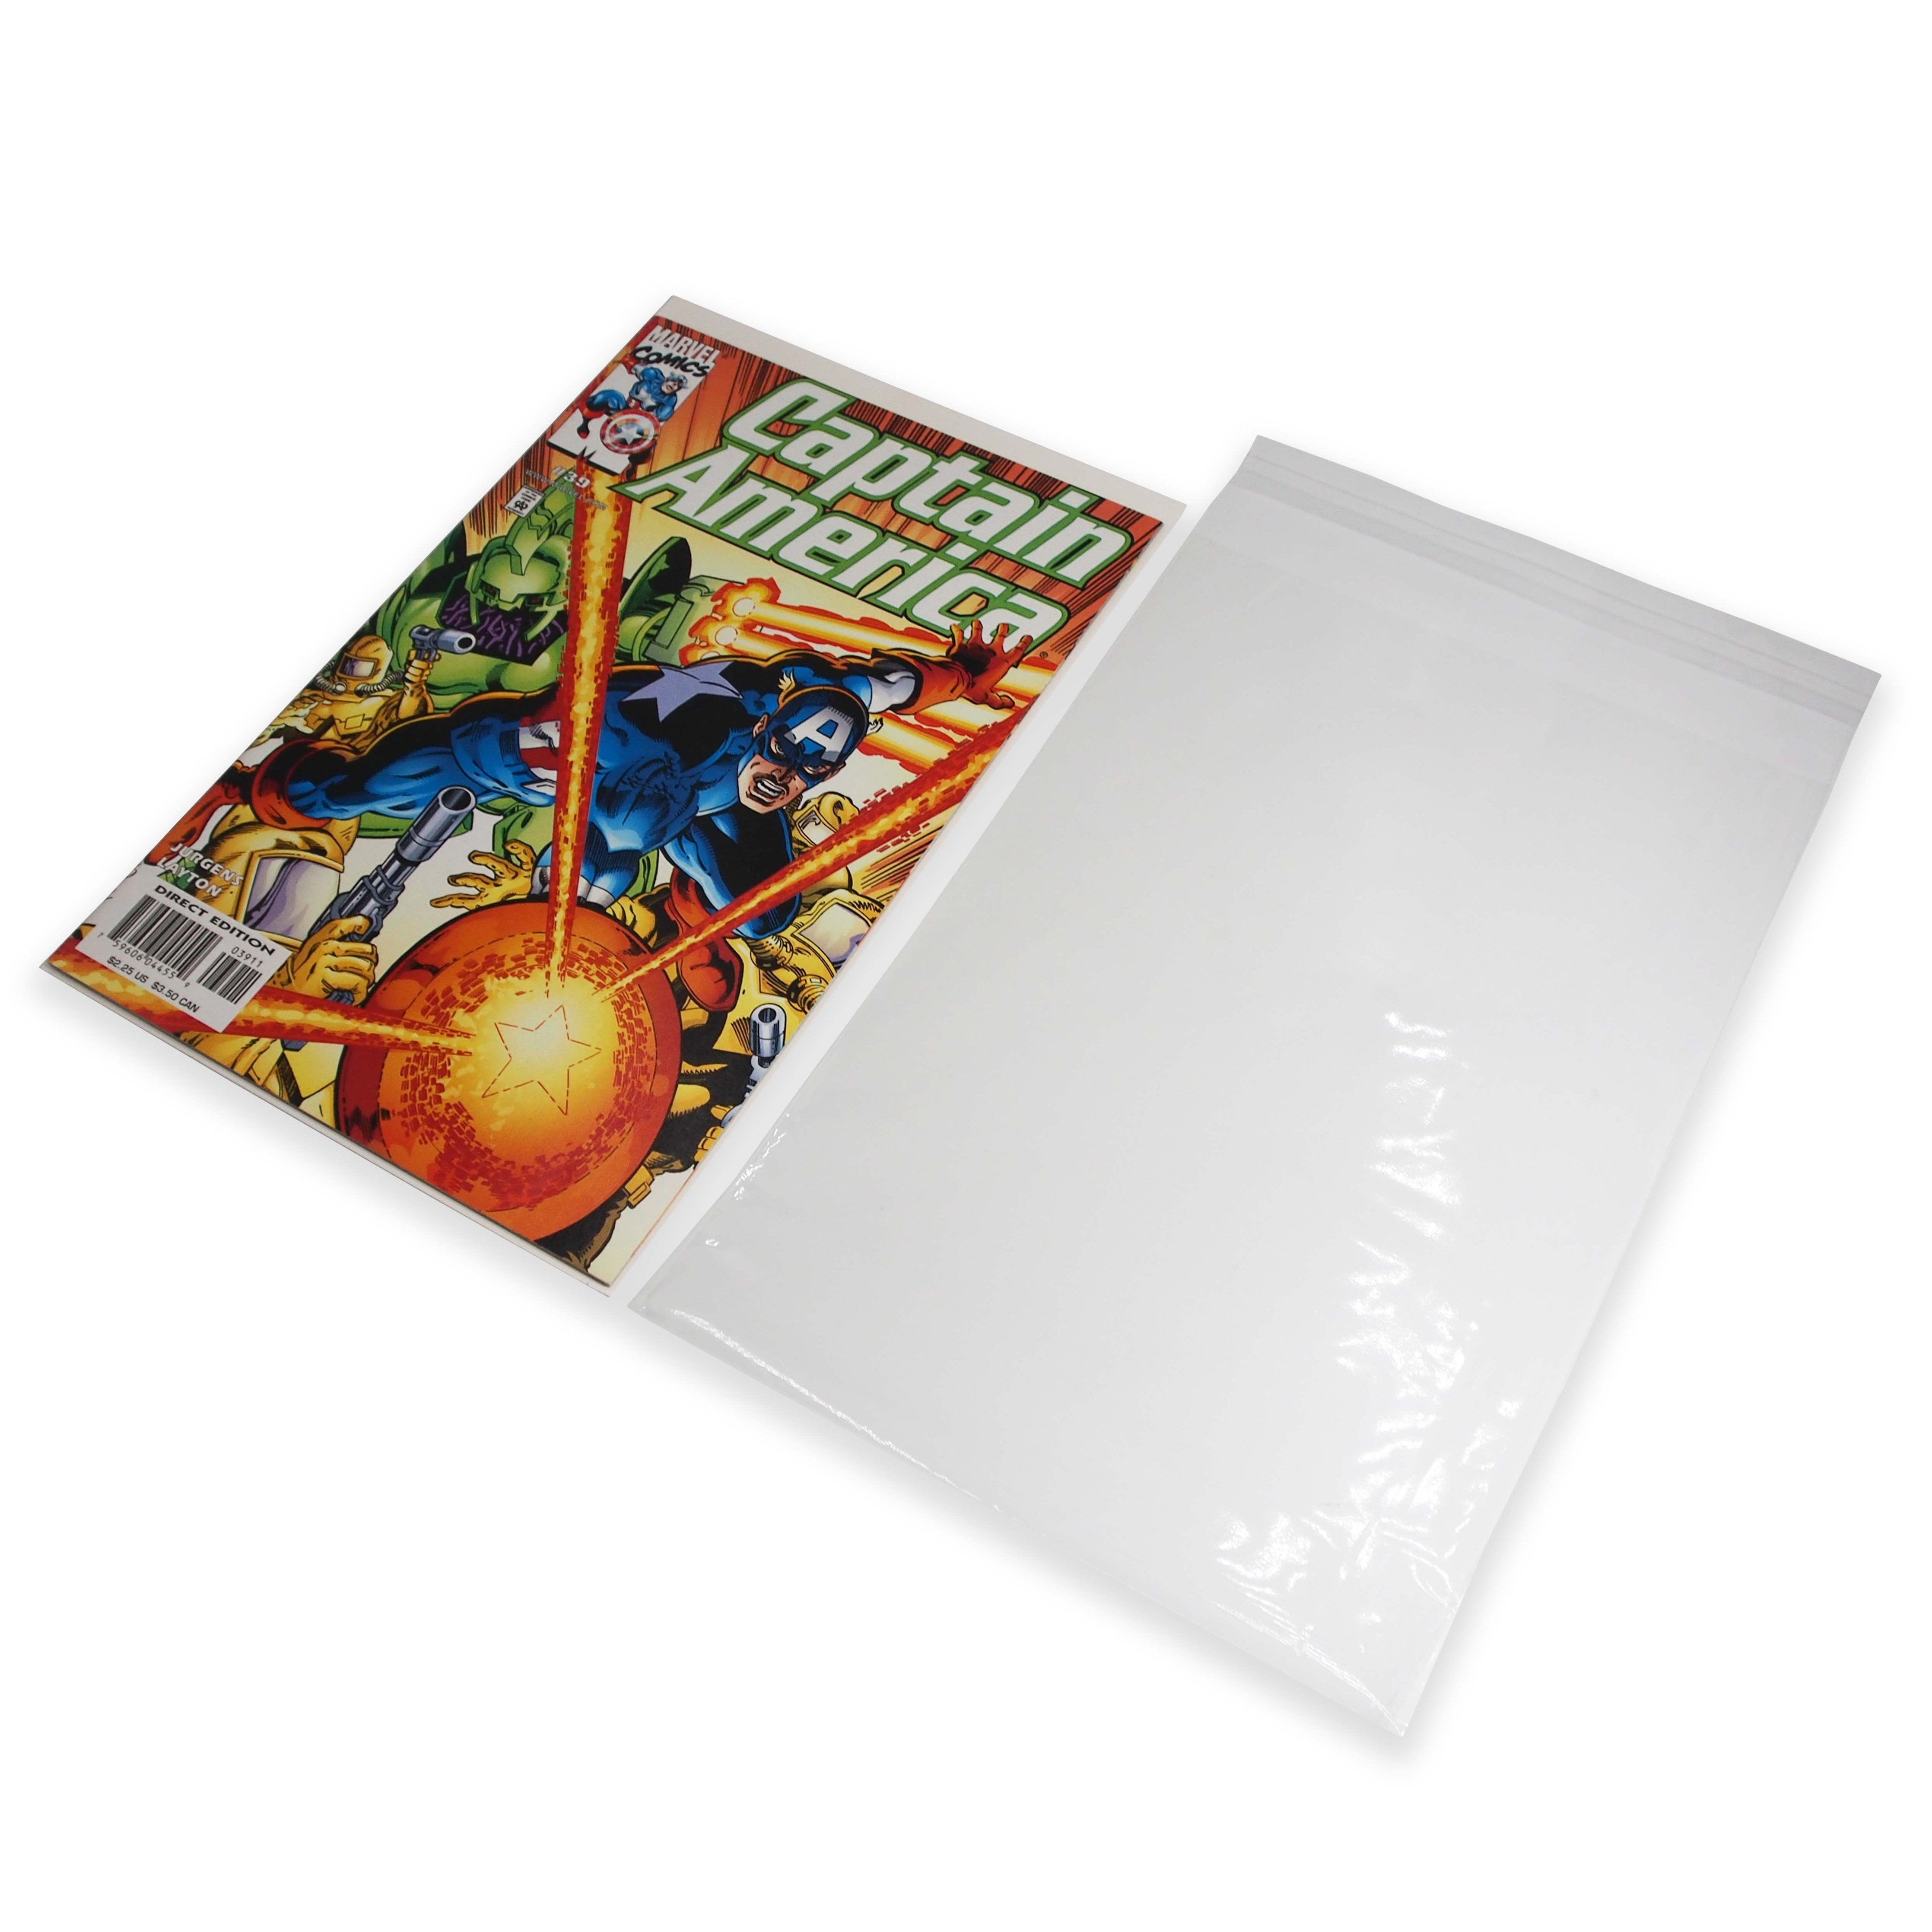 Open Ended Protects From Wear and Tear Pack of 100 Acid Free and Archival Safe COMIC1NG Art ClearBags 6 x 10 Clear Comic Book Bags or Memorabilia Perfect for Comic Books 